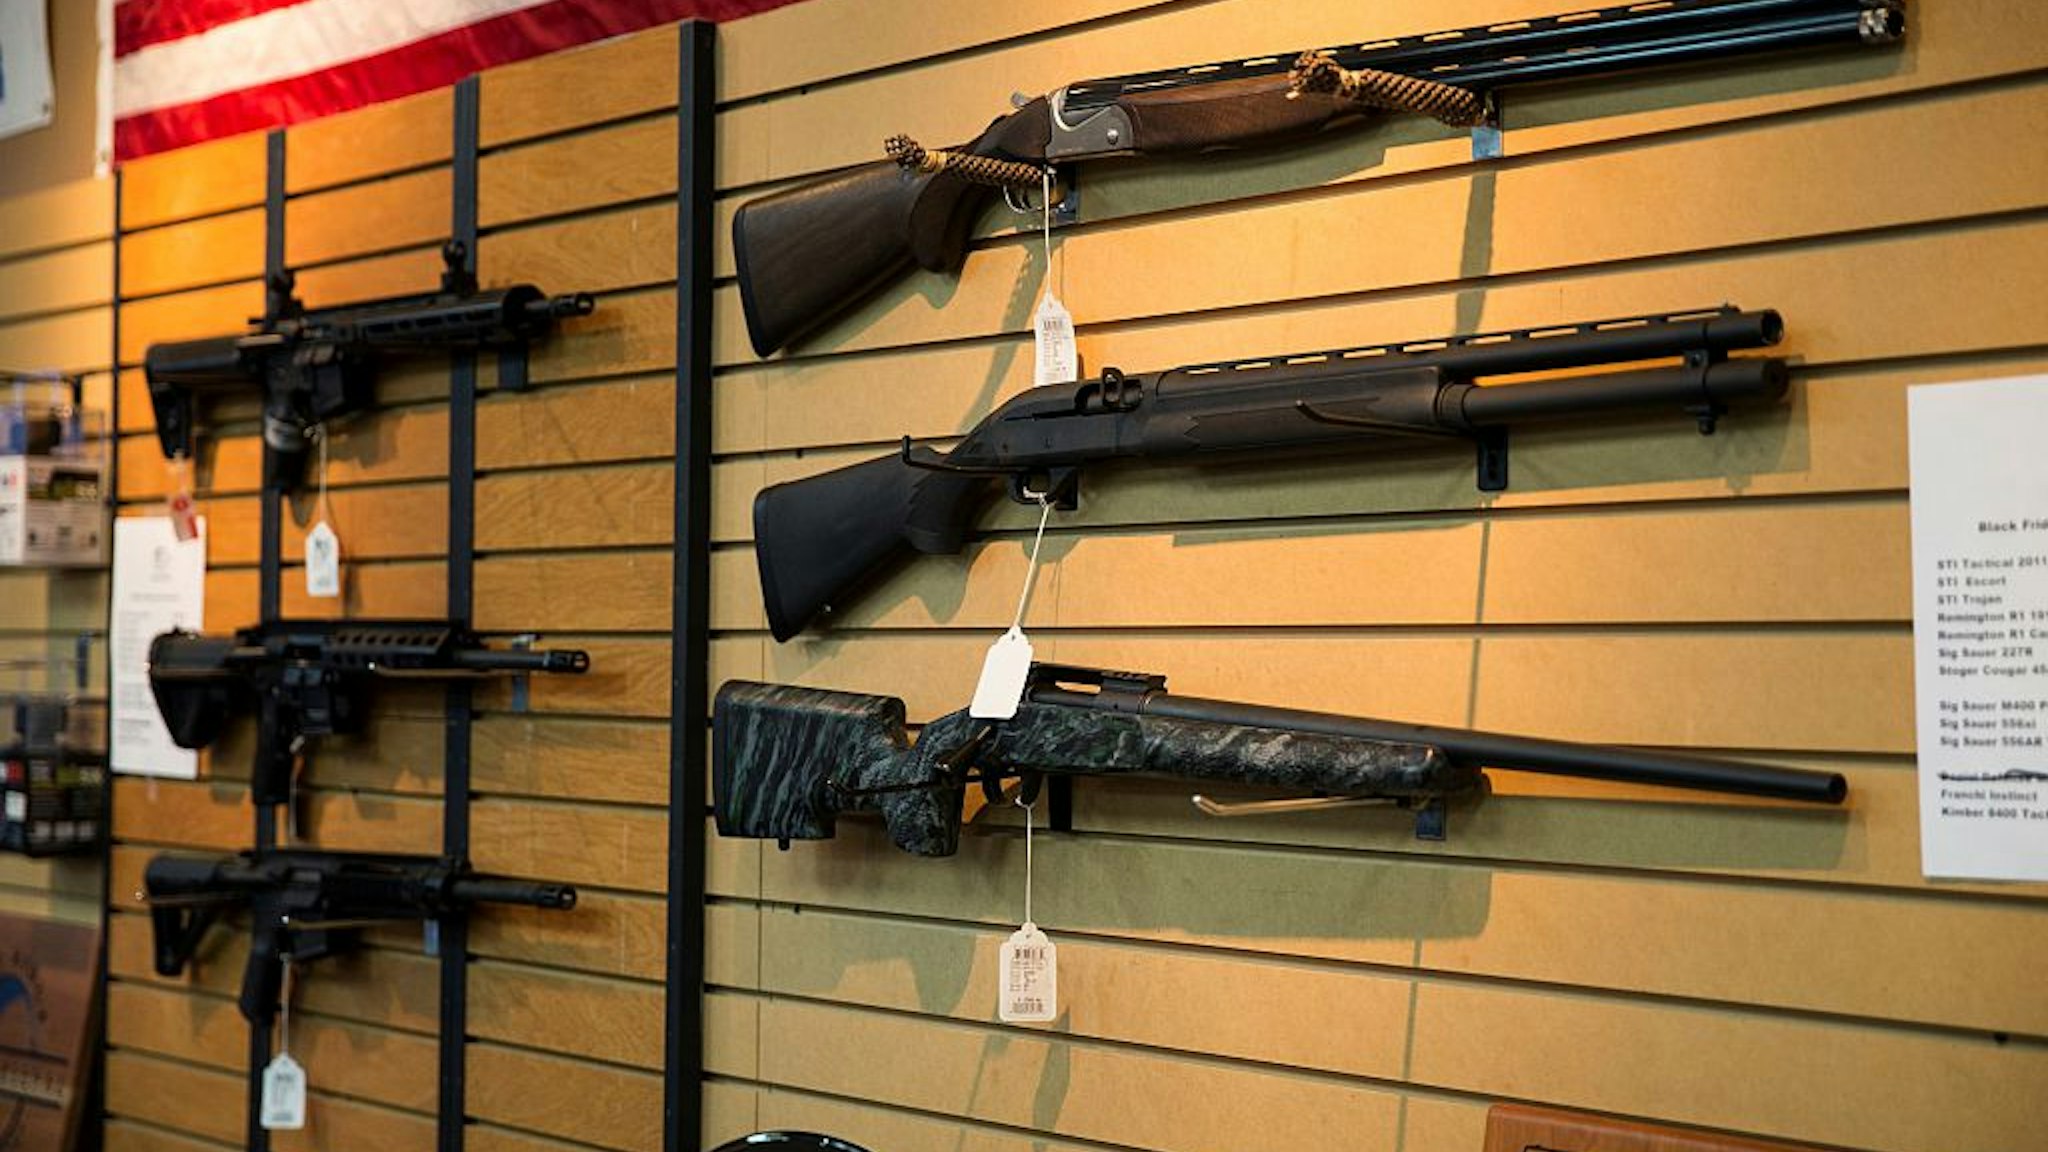 JANUARY 9: Shotguns and AR-15 style rifles for sale at Blue Ridge Arsenal in Chantilly, Va., USA on January 9, 2015.